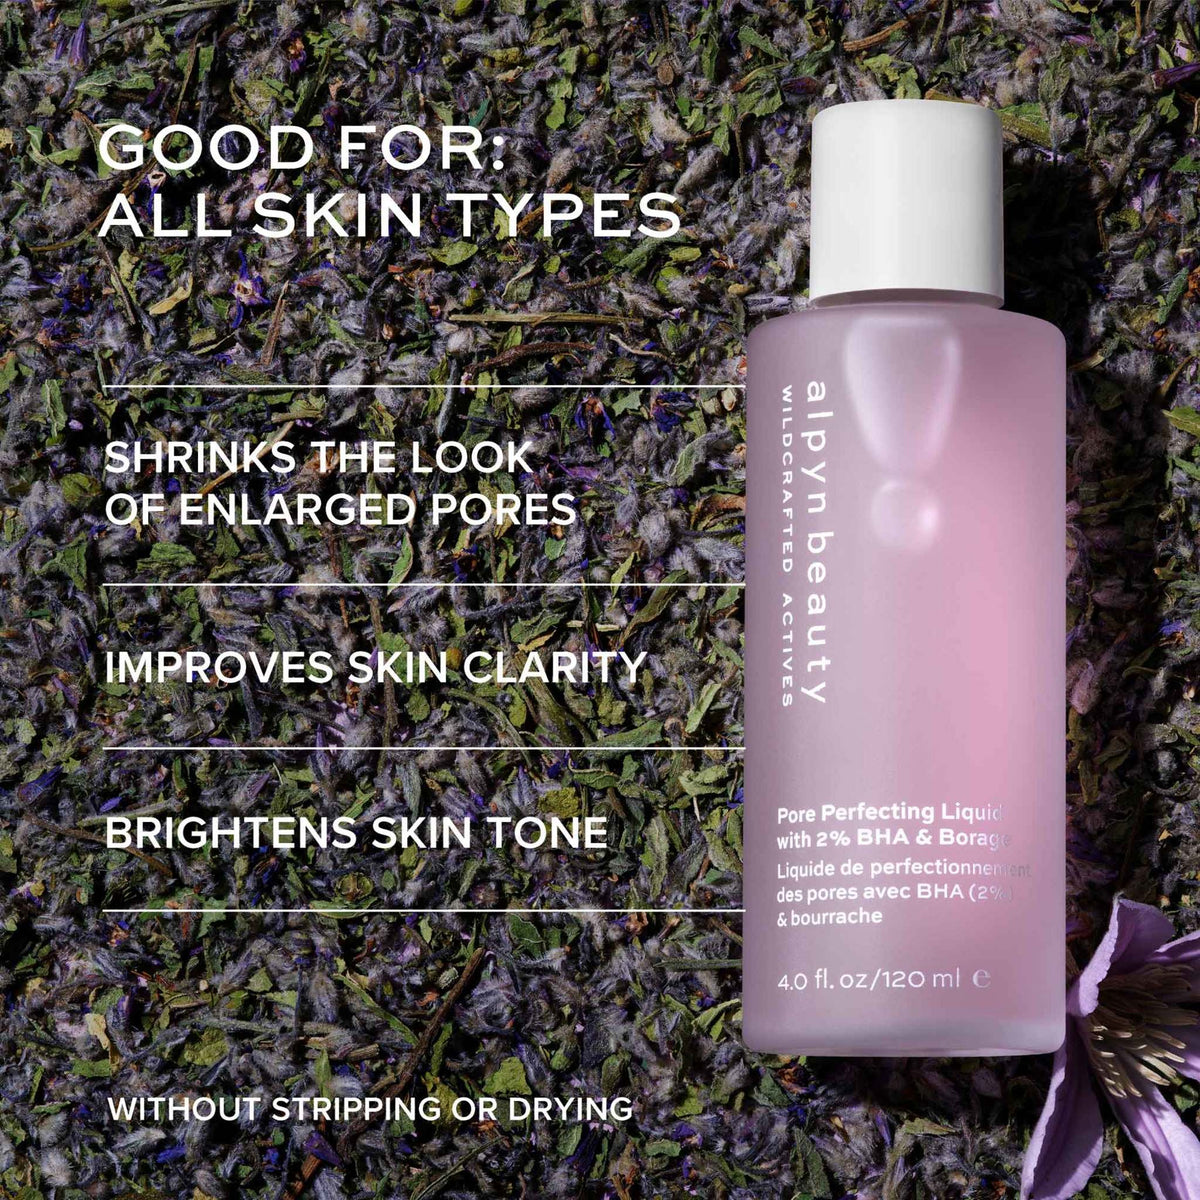 Alpyn Beauty Pore Perfecting Liquid with 2% BHA and Borage .